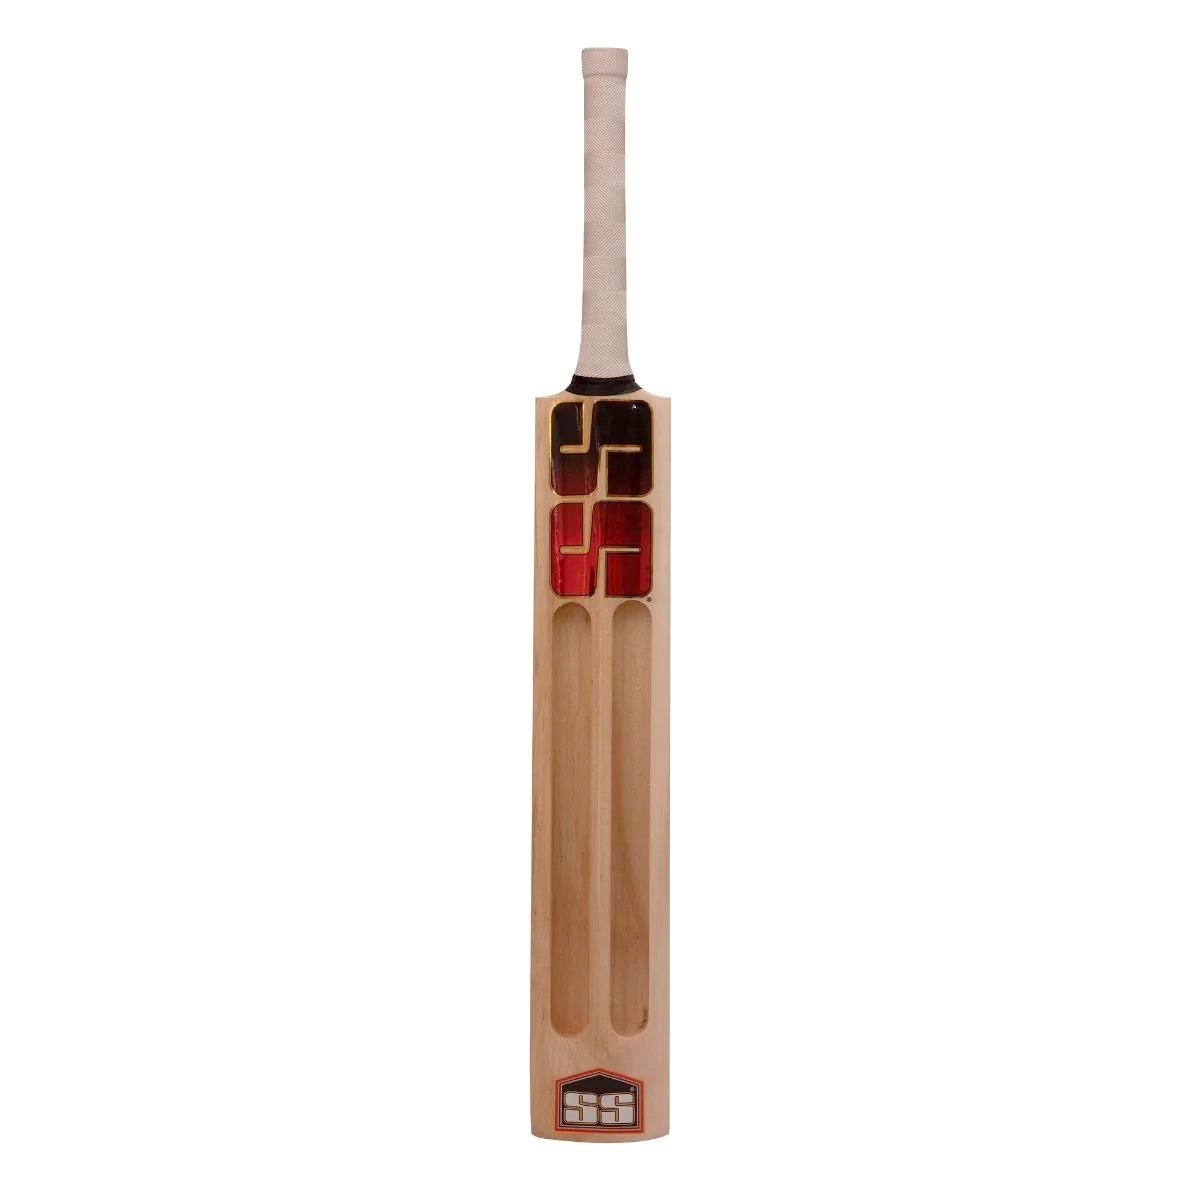 SS Tennis Pro Scoop Cricket bat, premium Kashmir Willow, lightweight with full control, unique design, ready to play, and comes with a premium SS bat cover, made in India.